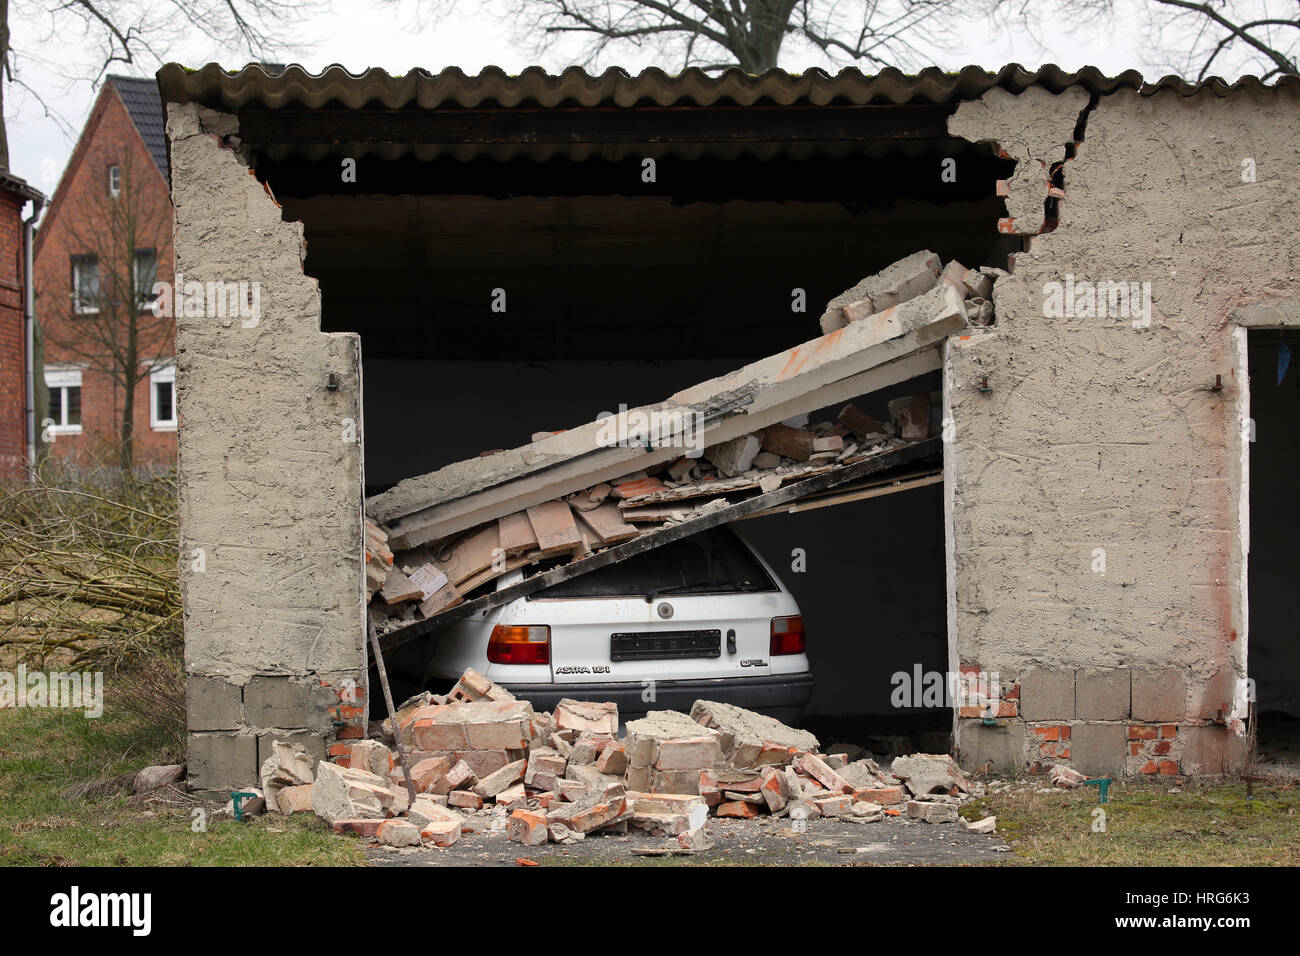 Kummer, Germany. 01st Mar, 2017. A car in a collapsed garage in Kummer, Germany, 01 March 2017. The local fire brigade placed the car here to simulate a car accident rescue situation for training purposes. Photo: Bernd Wüstneck/dpa-Zentralbild/dpa/Alamy Live News Stock Photo